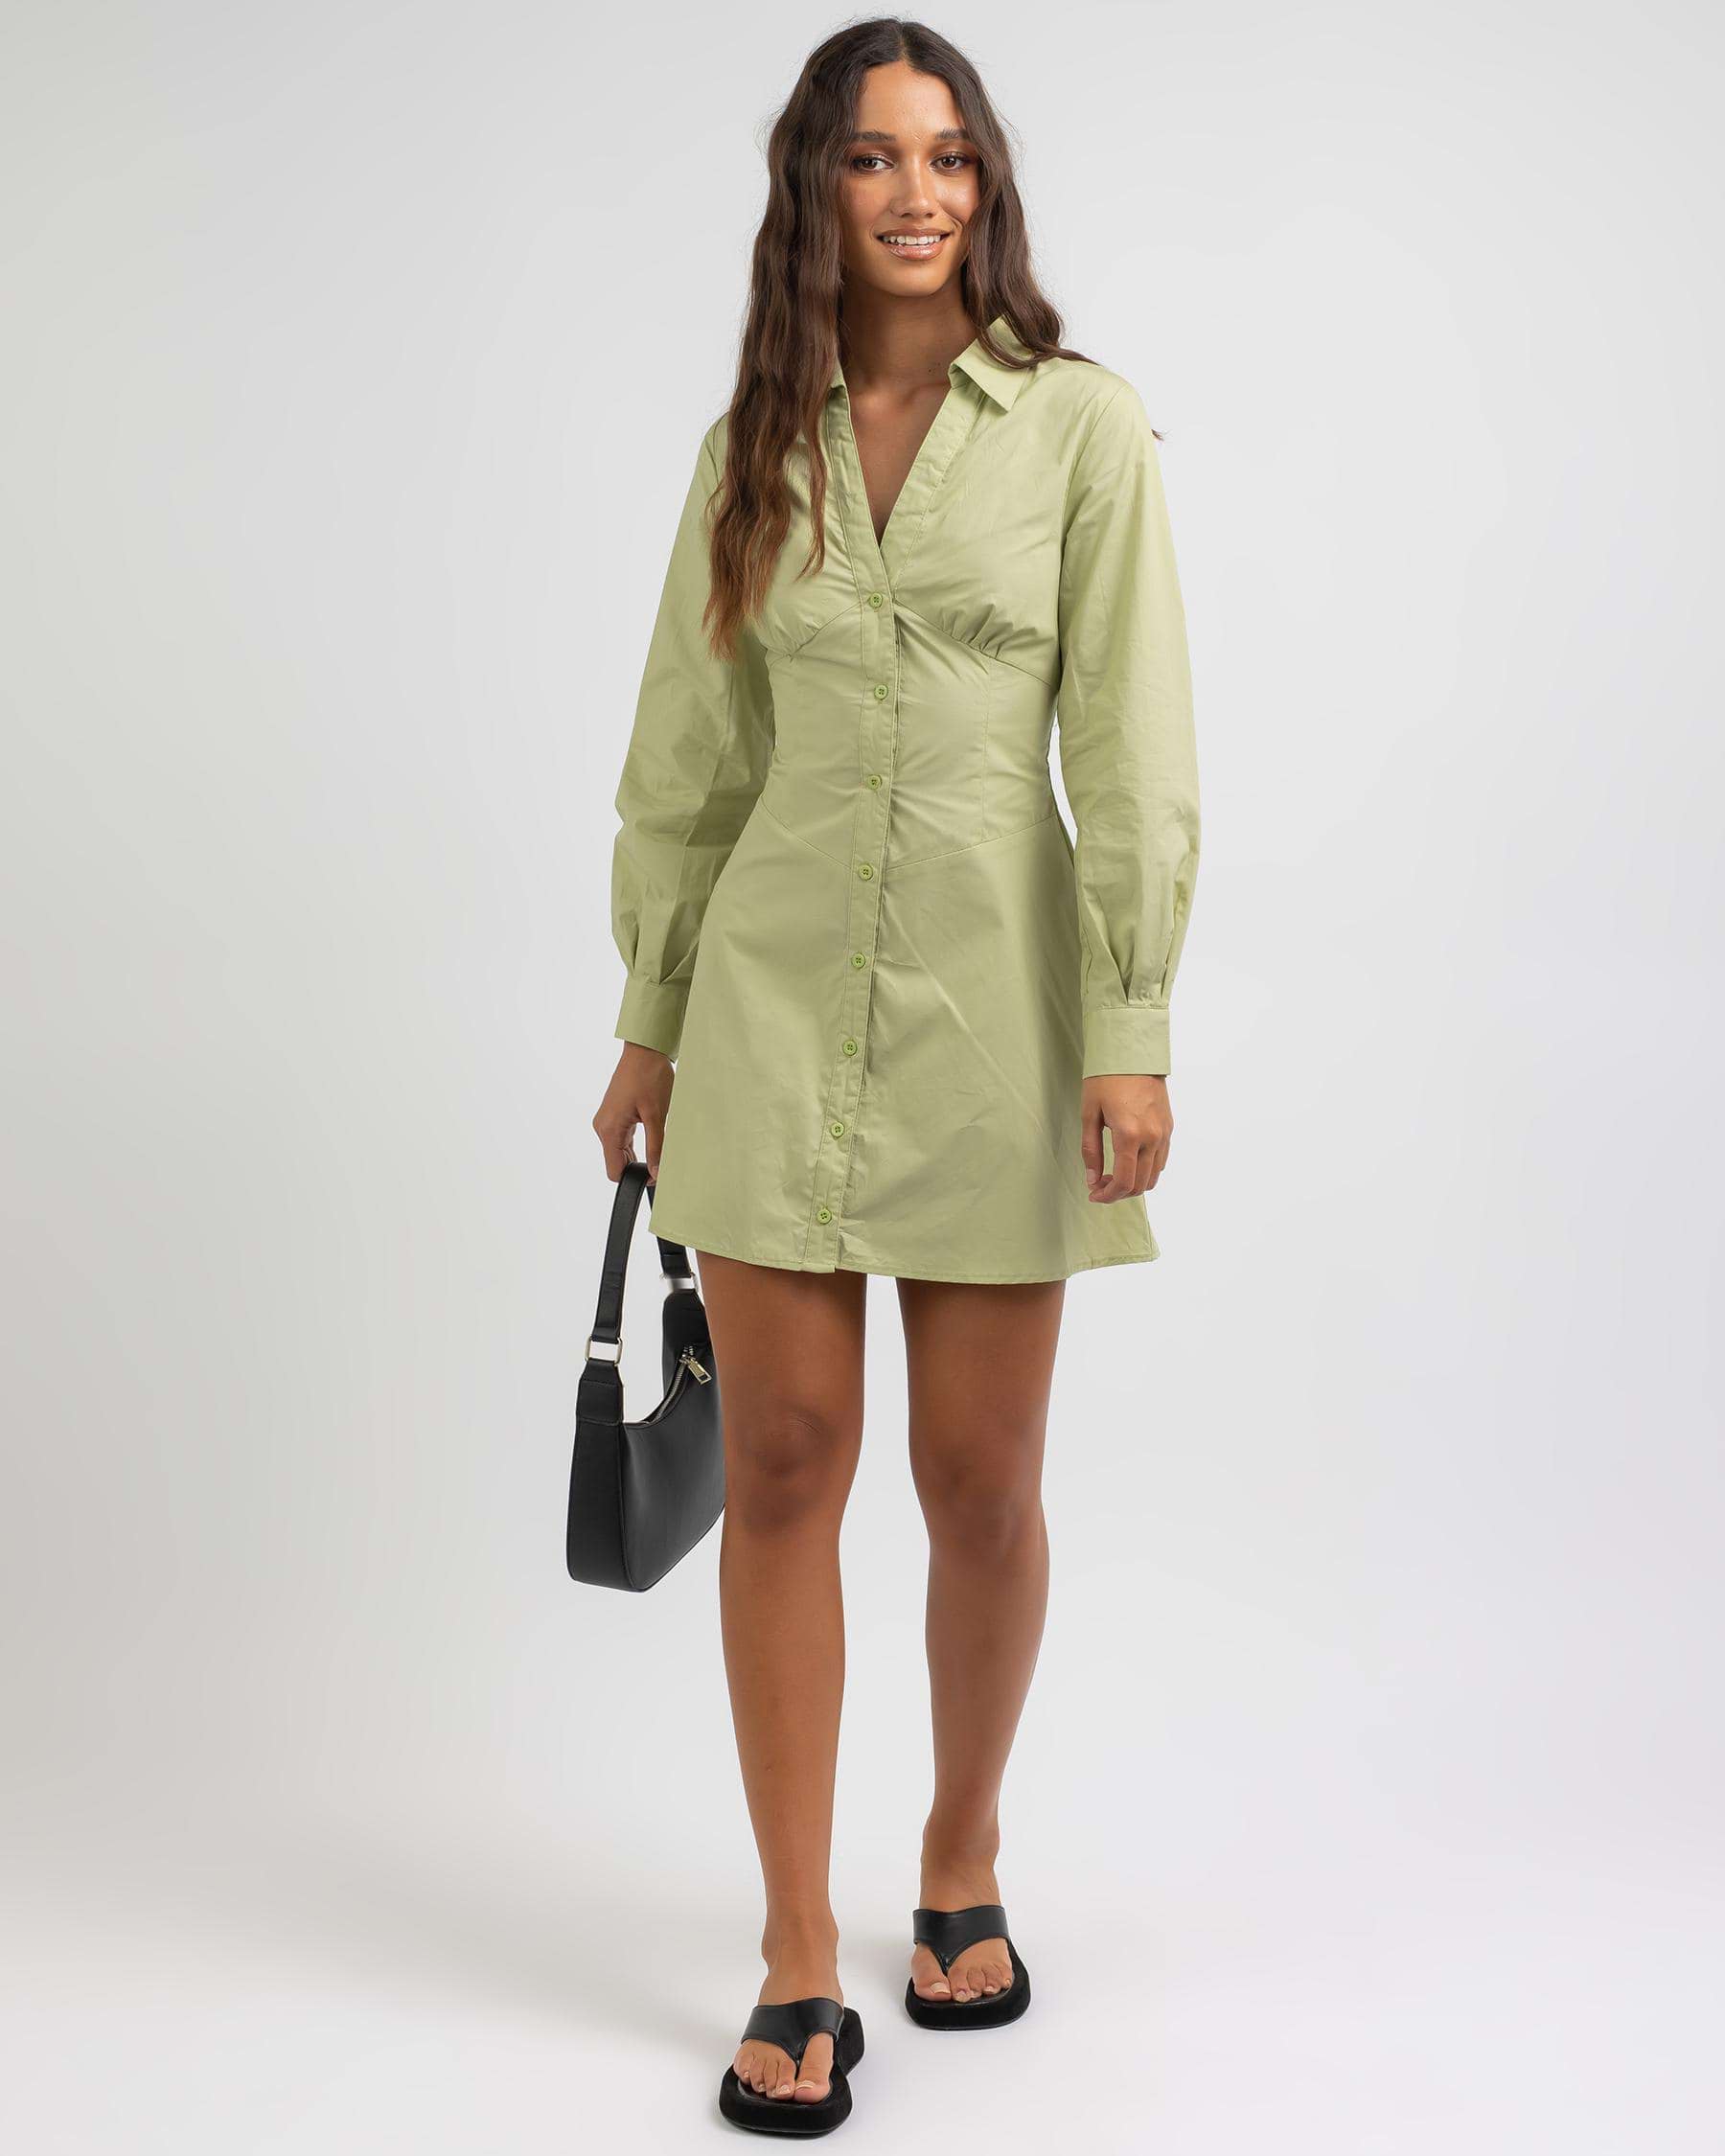 Into Fashions Shane Dress In Green - Fast Shipping & Easy Returns ...